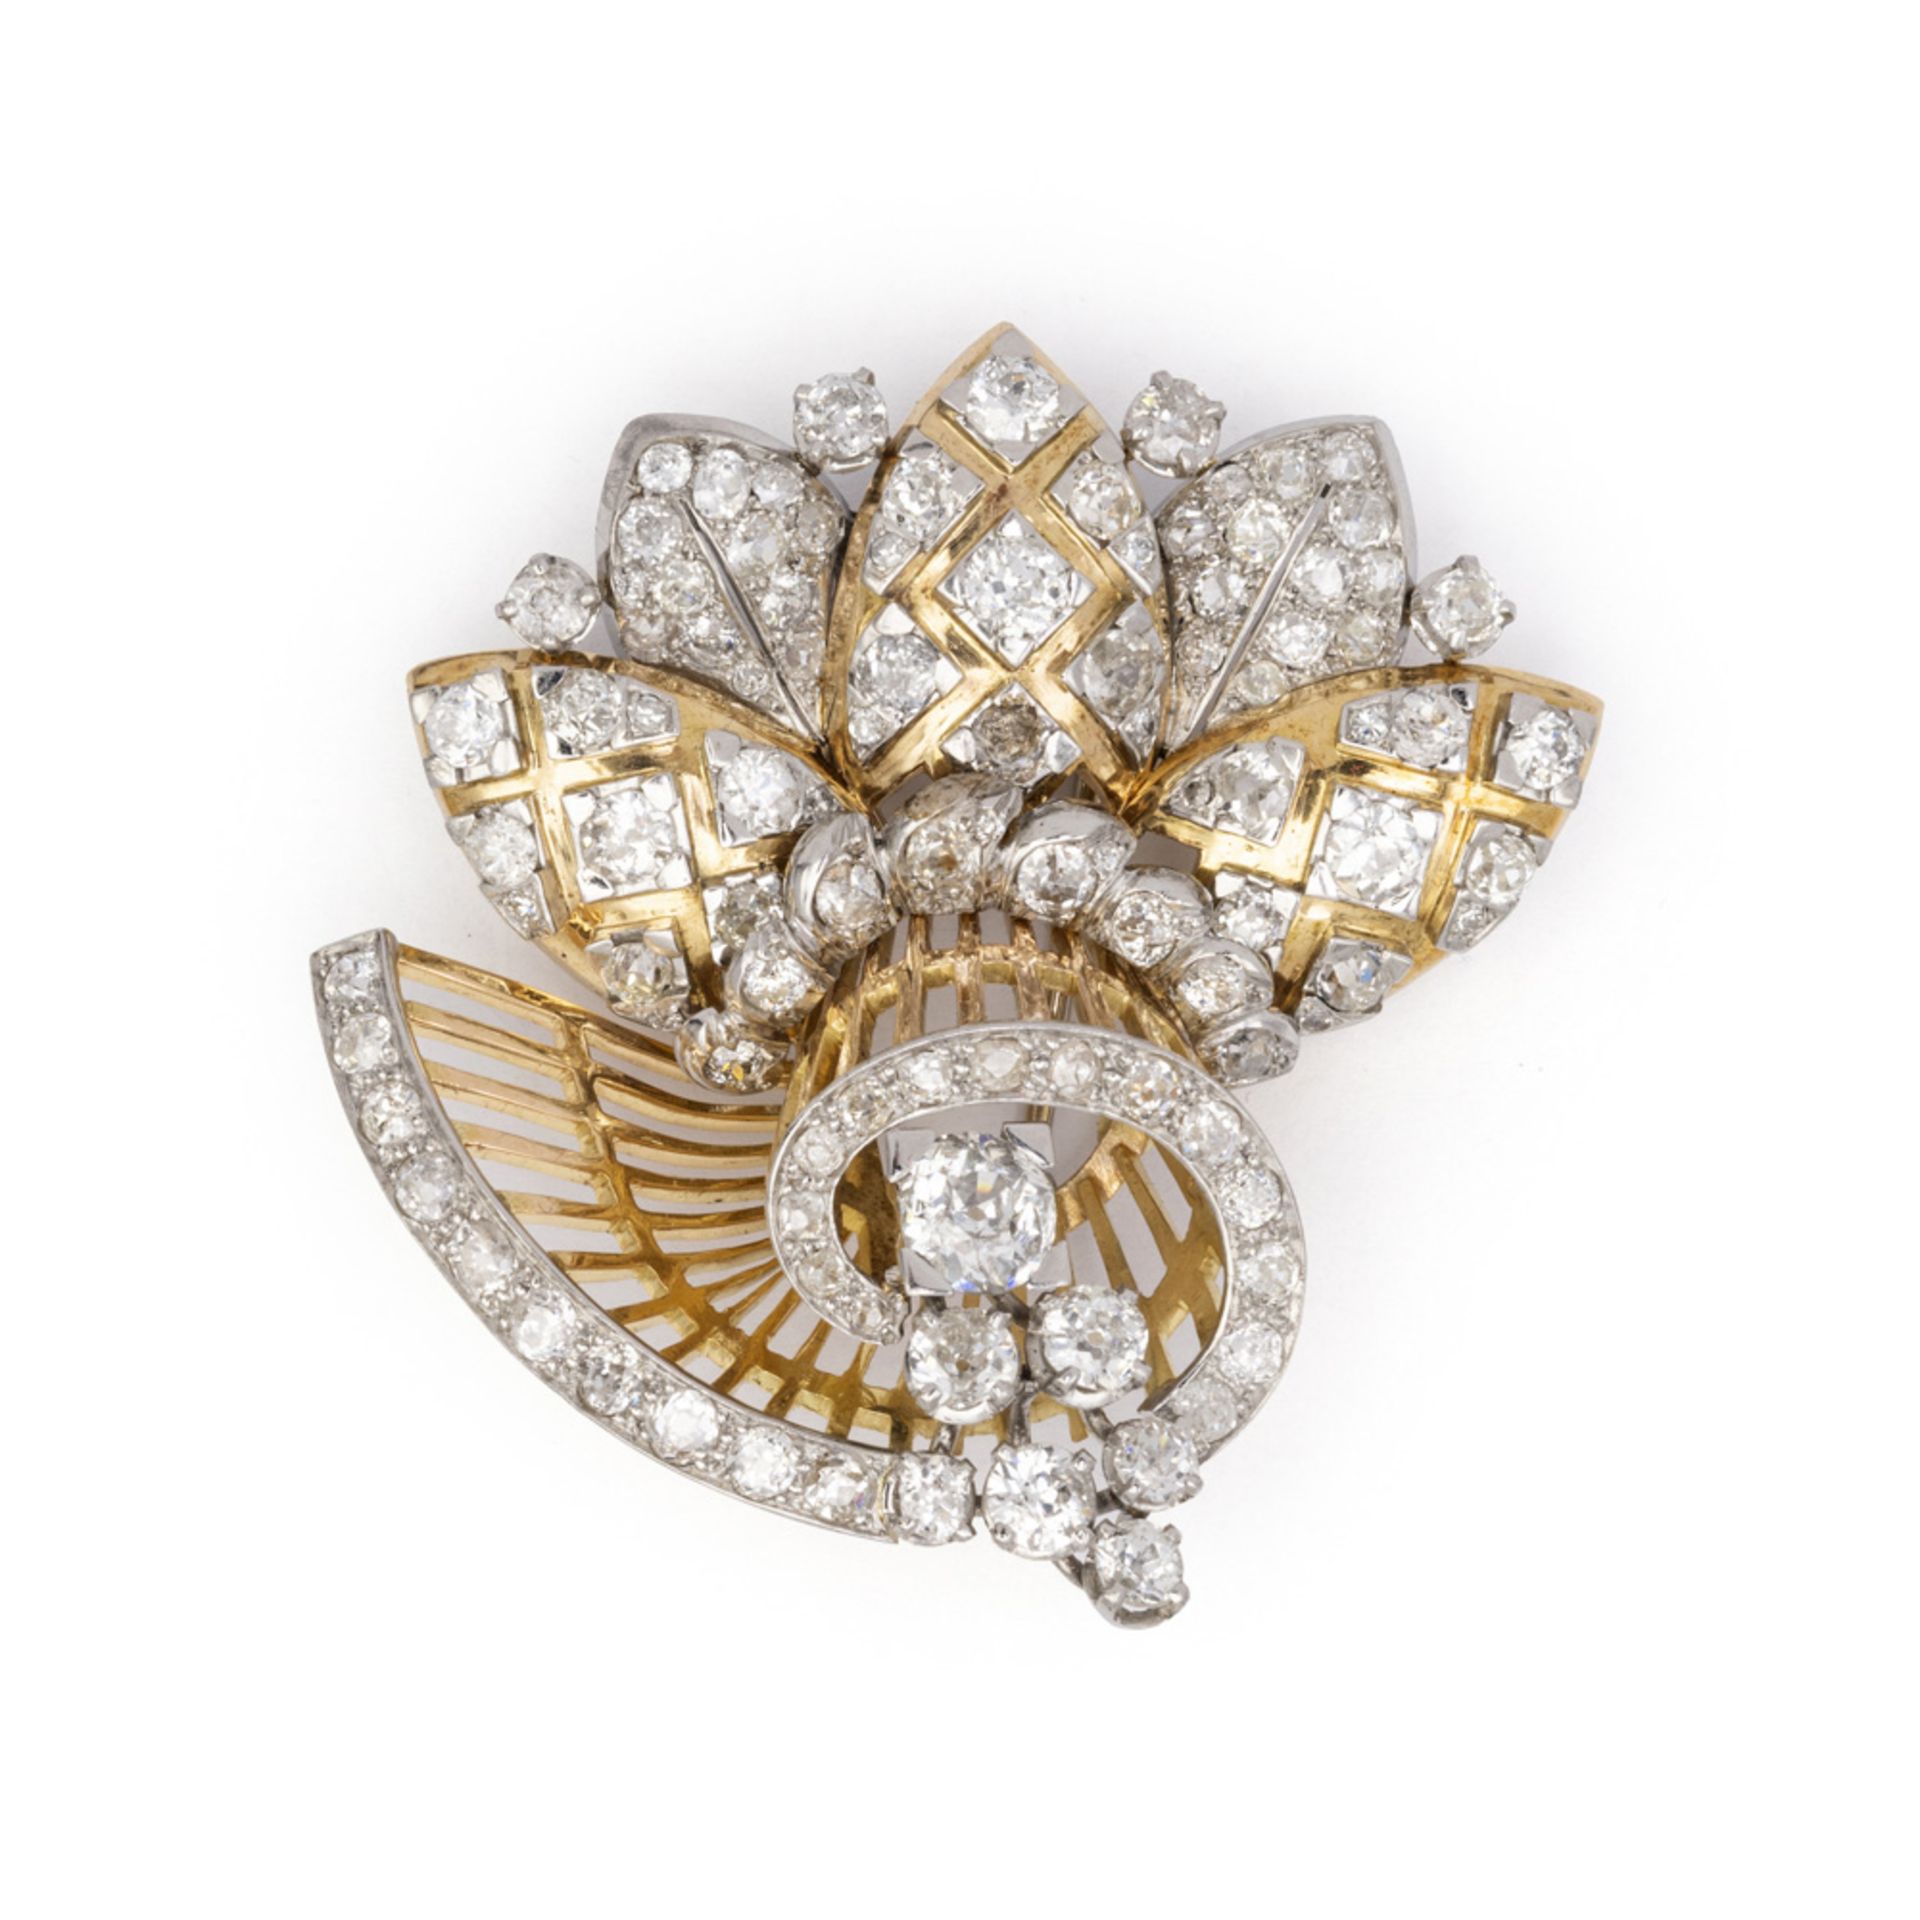 18kt yellow and white gold and diamonds brooch